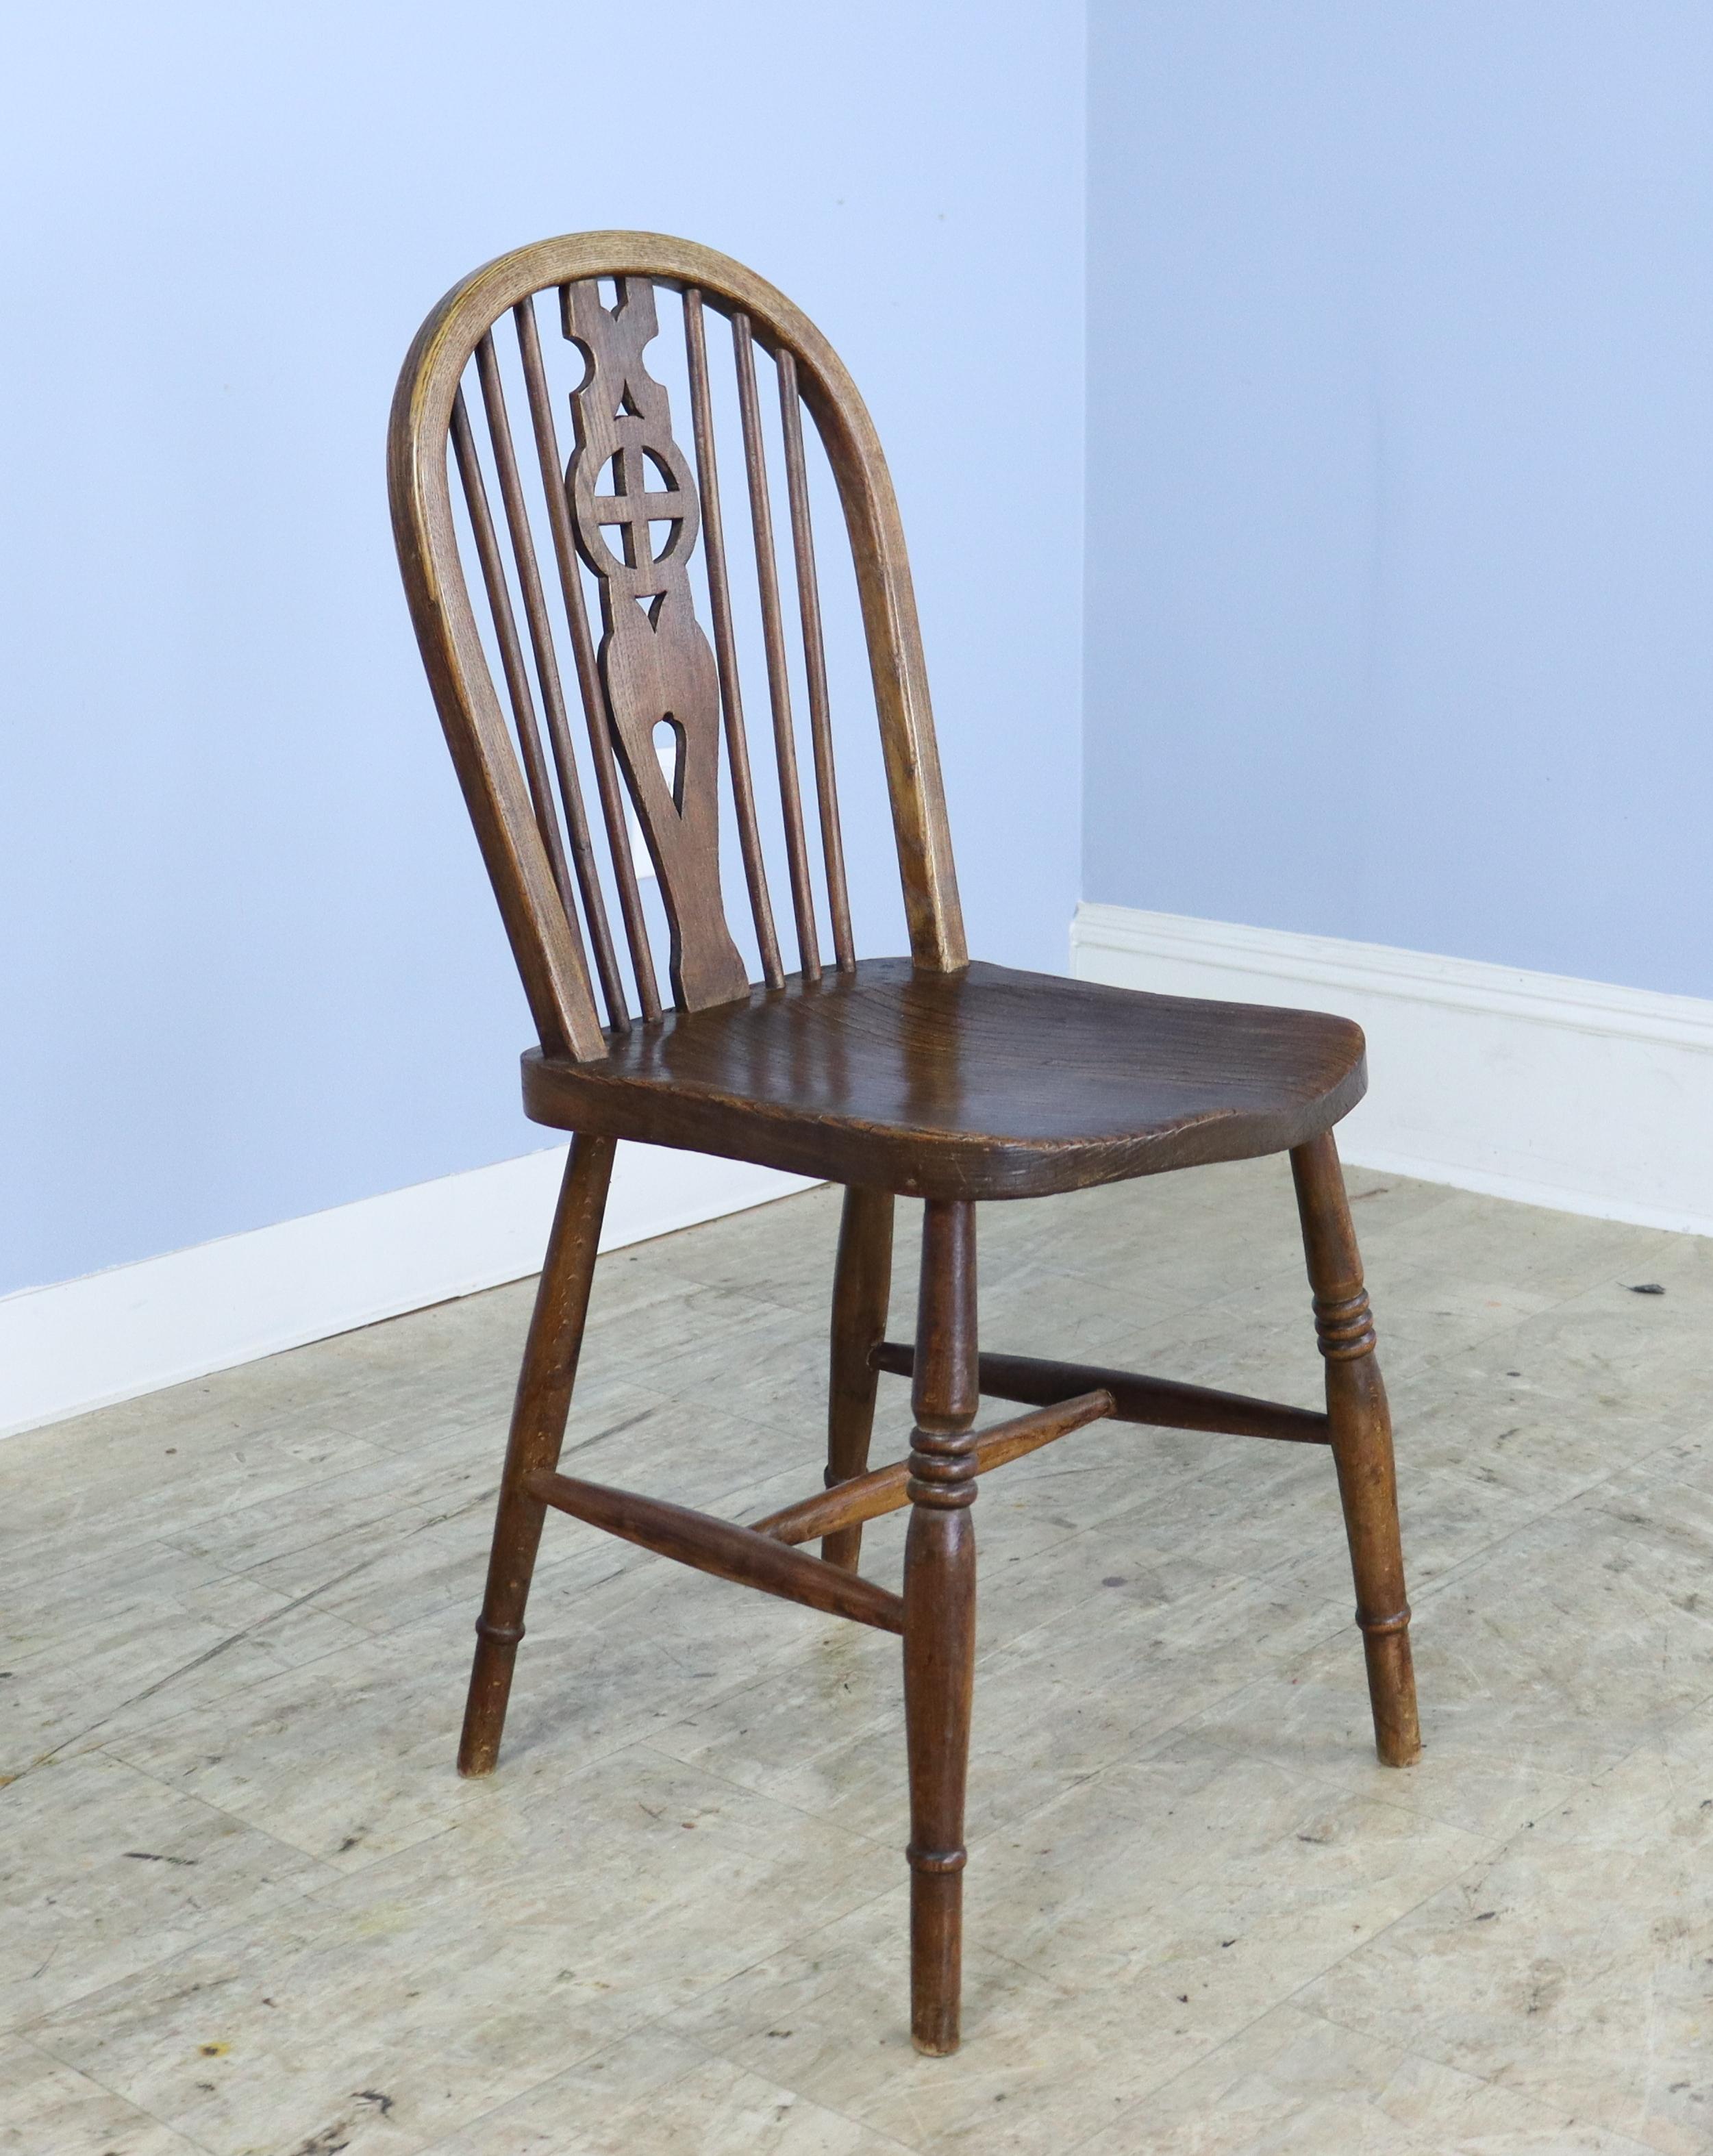 A set of ten English elm Windsor chairs in very good antique condition. The traditional wheelback design is slightly different in each handmade chair. These would look wonderful around any number of table styles. Good color and patina and quite